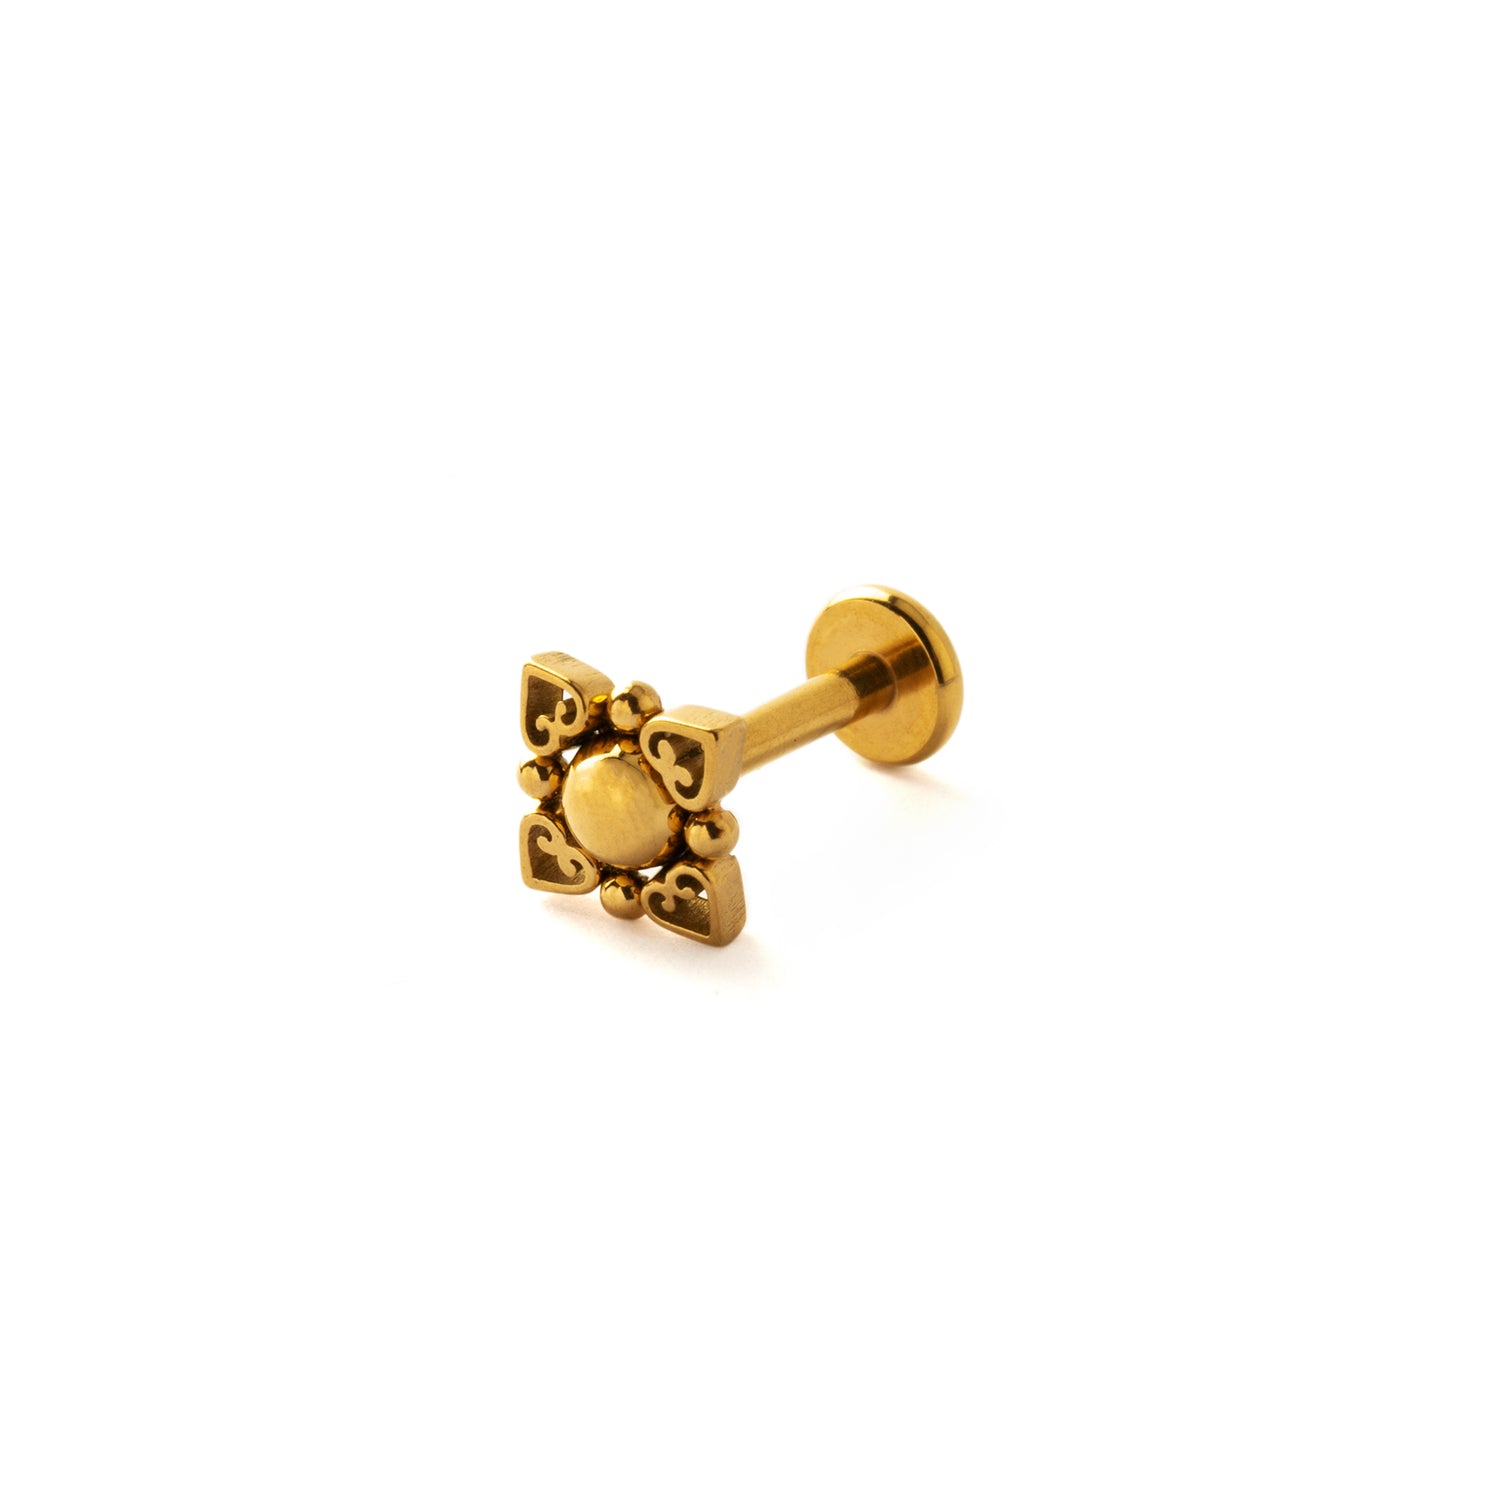 Neptune Gold surgical steel internally threaded Labret stud left side view